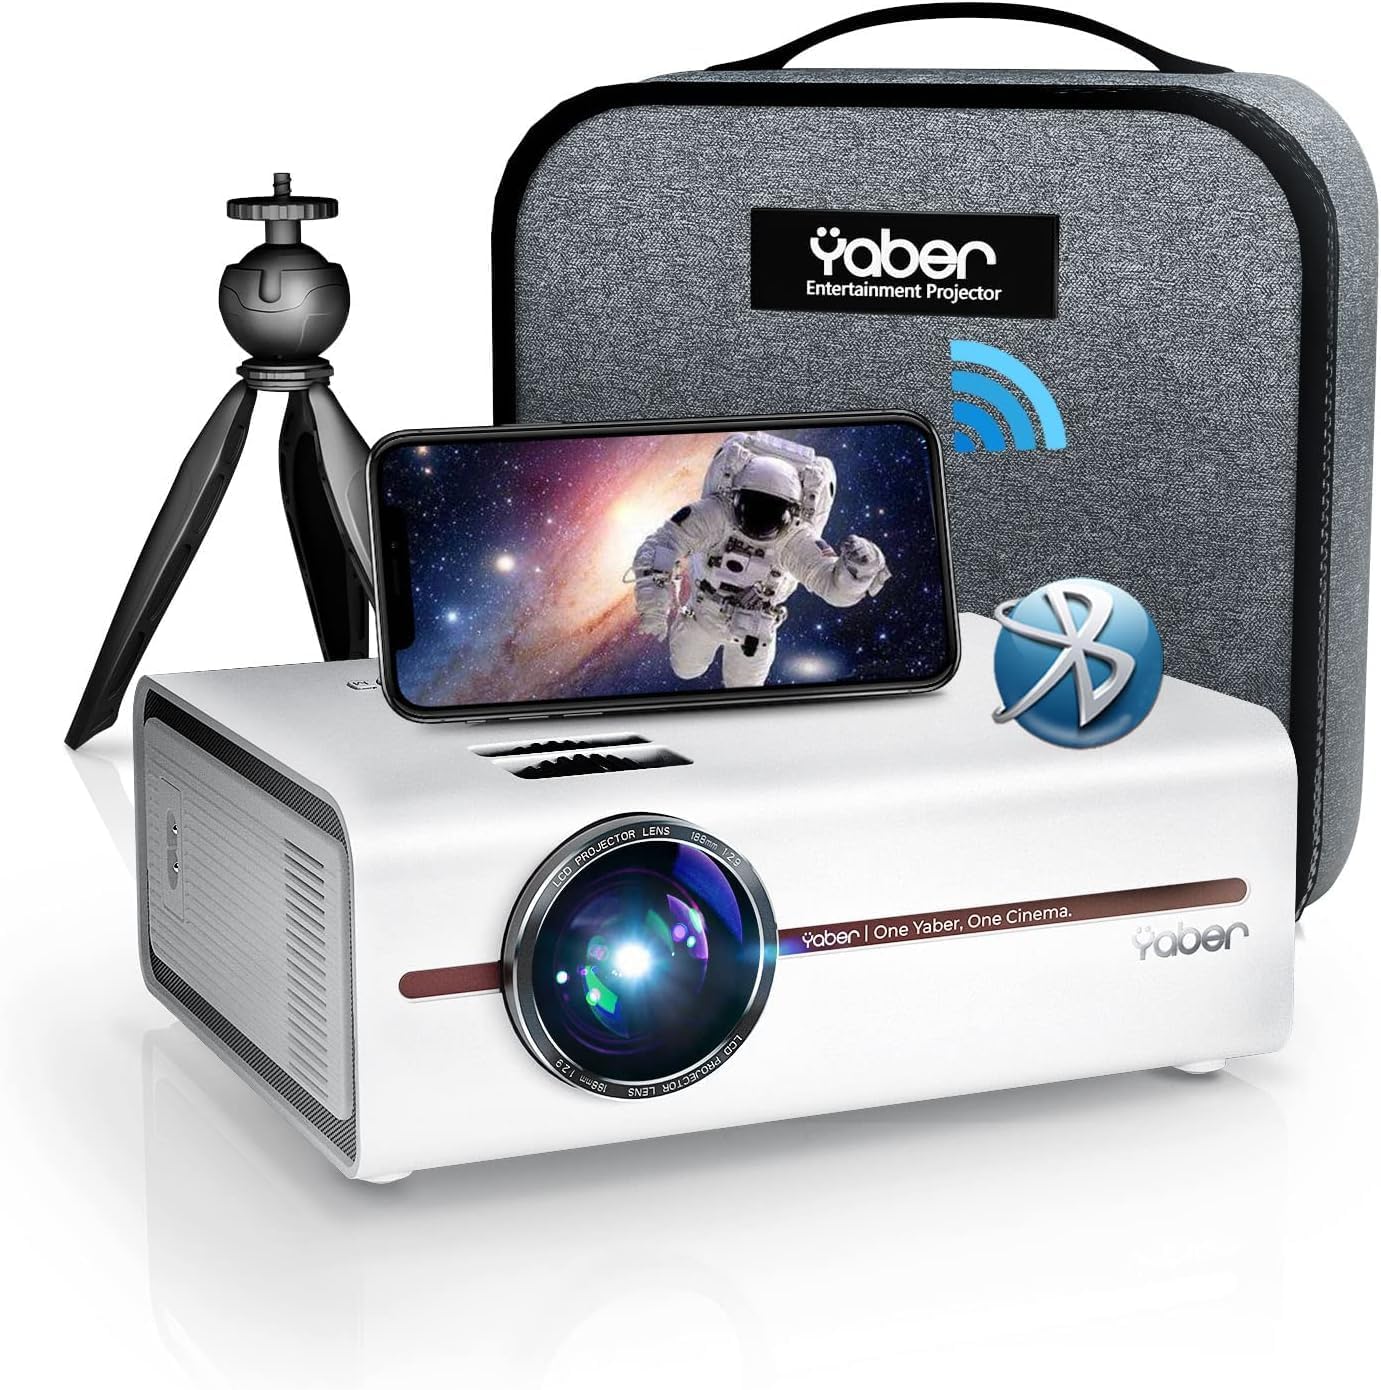 Mini Projector with WiFi and Bluetooth 5.1, 9500L Portable Movie Projector